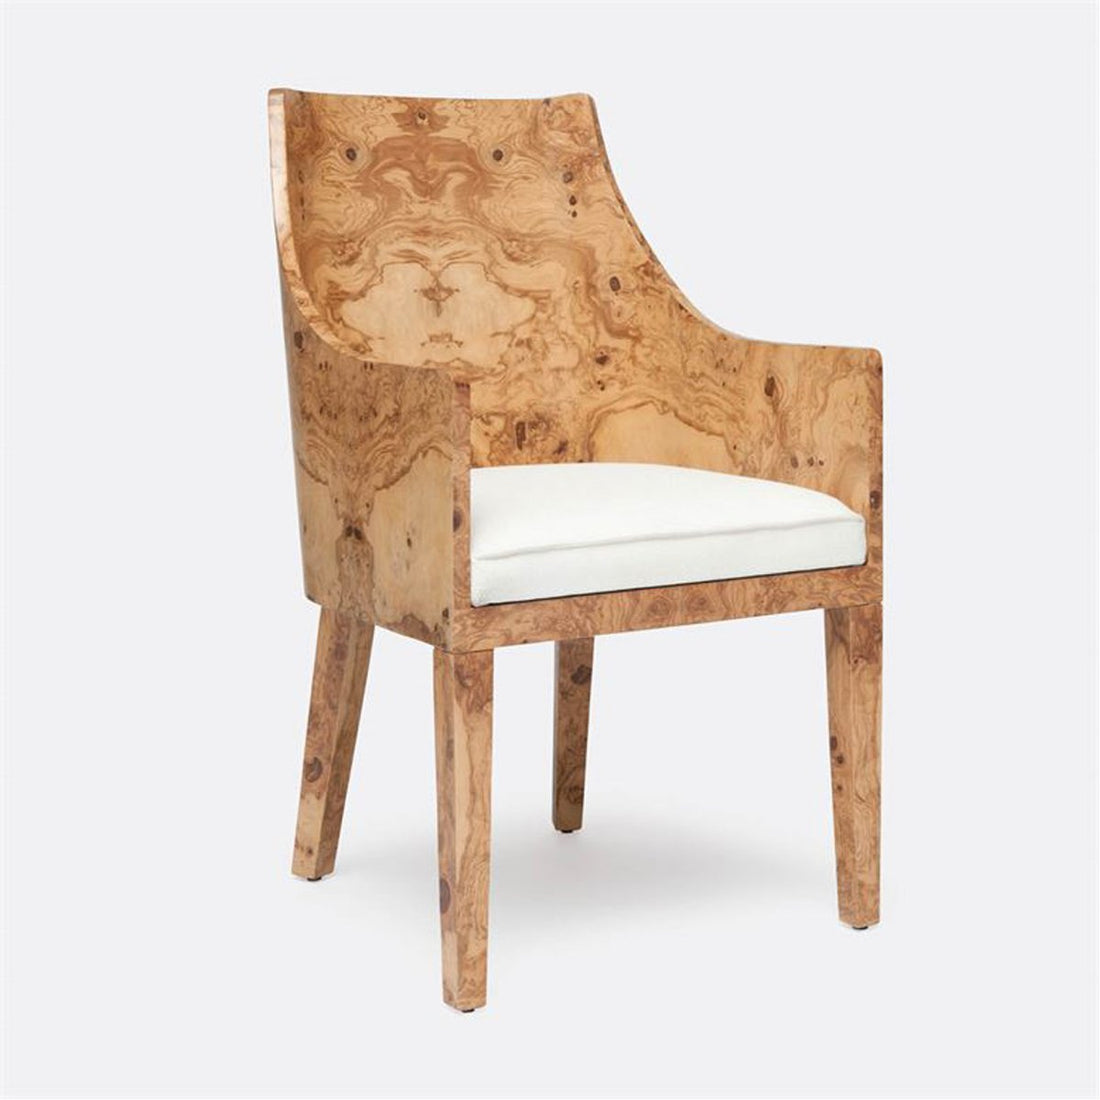 Made Goods Everett Olive Ash Veneer Arm Chair in Kern Mix Fabric